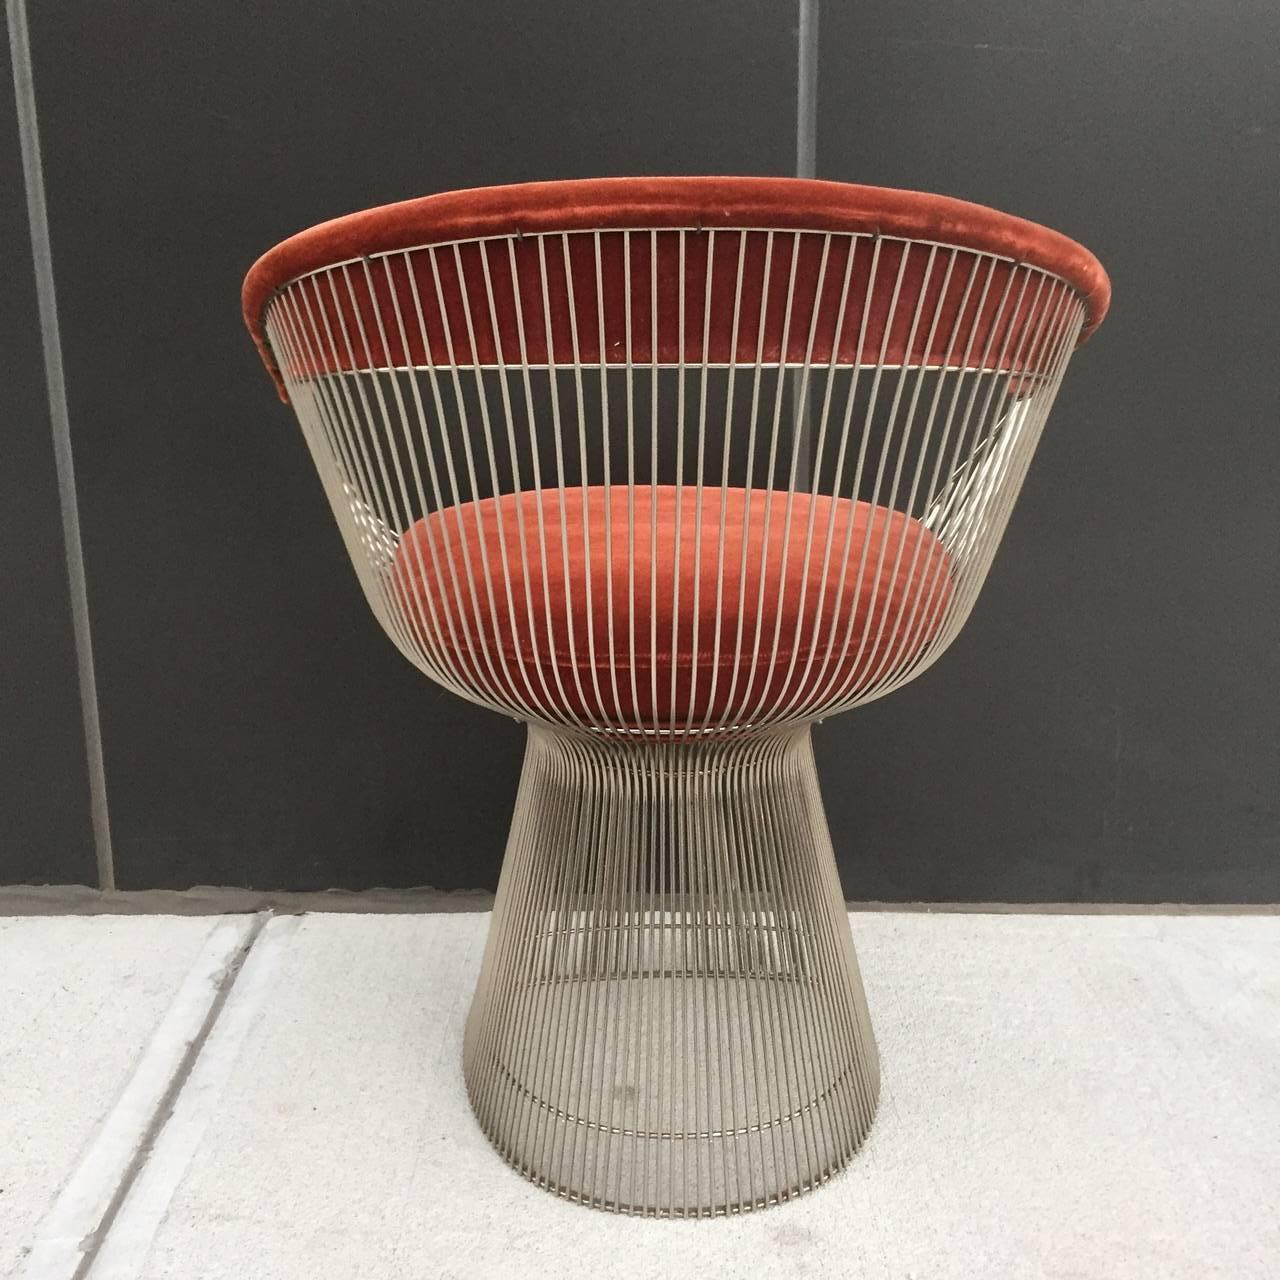 Up for sale is a fantastic Warren Platner for Knoll sculpted wire accent chair, with lush auburn reddish brown velvet upholstery. 

This chair both functional and art is an icon of mid century modern design from one of the period's whimsical